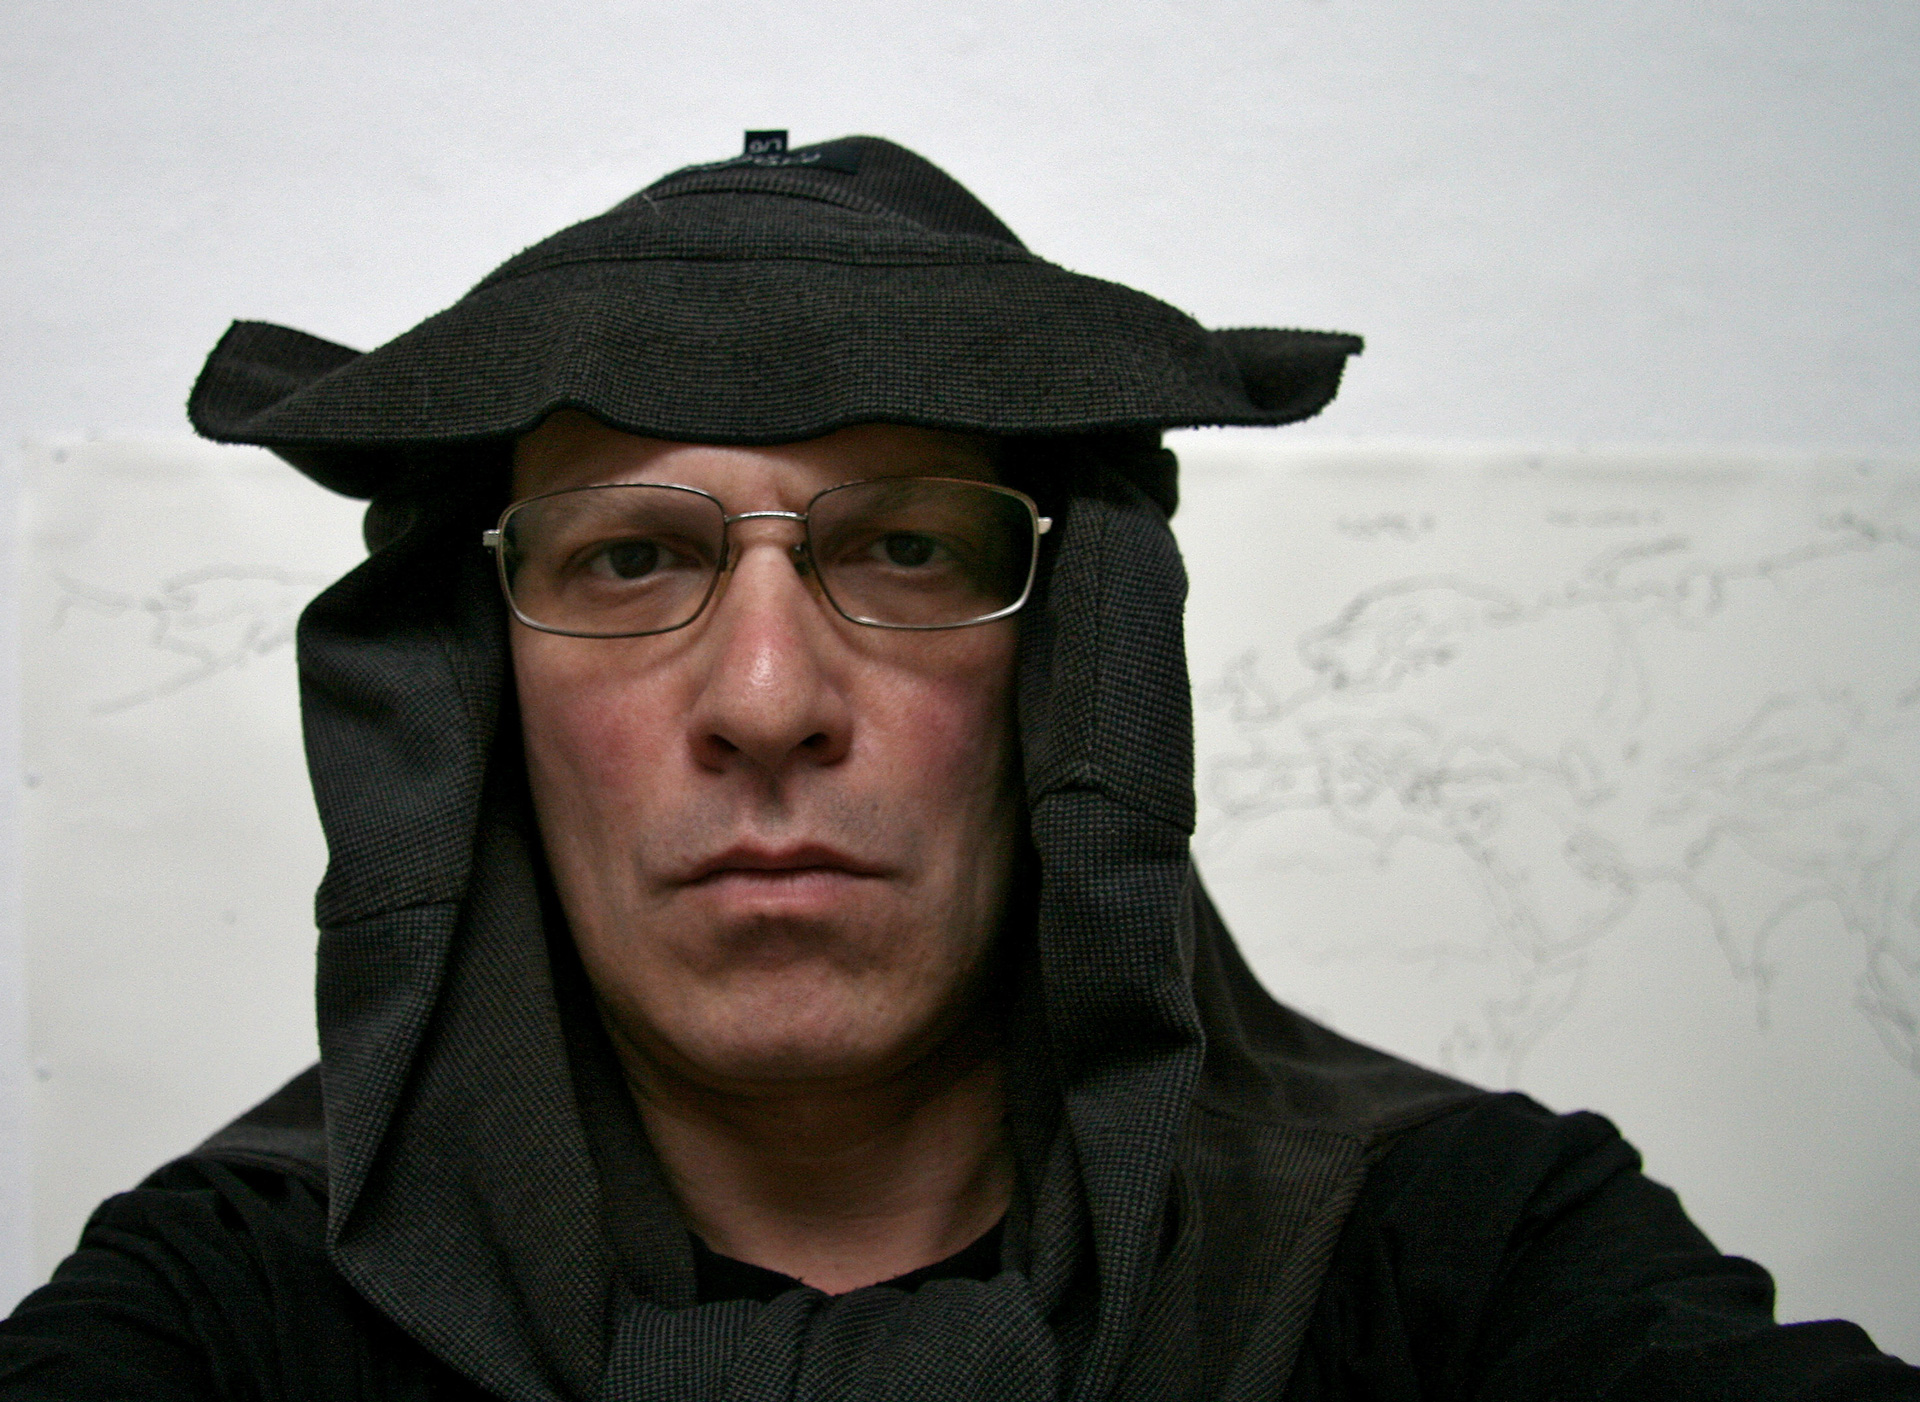 The Inquisition – get out! Self-portrait with a warm flannel over the head, 2007